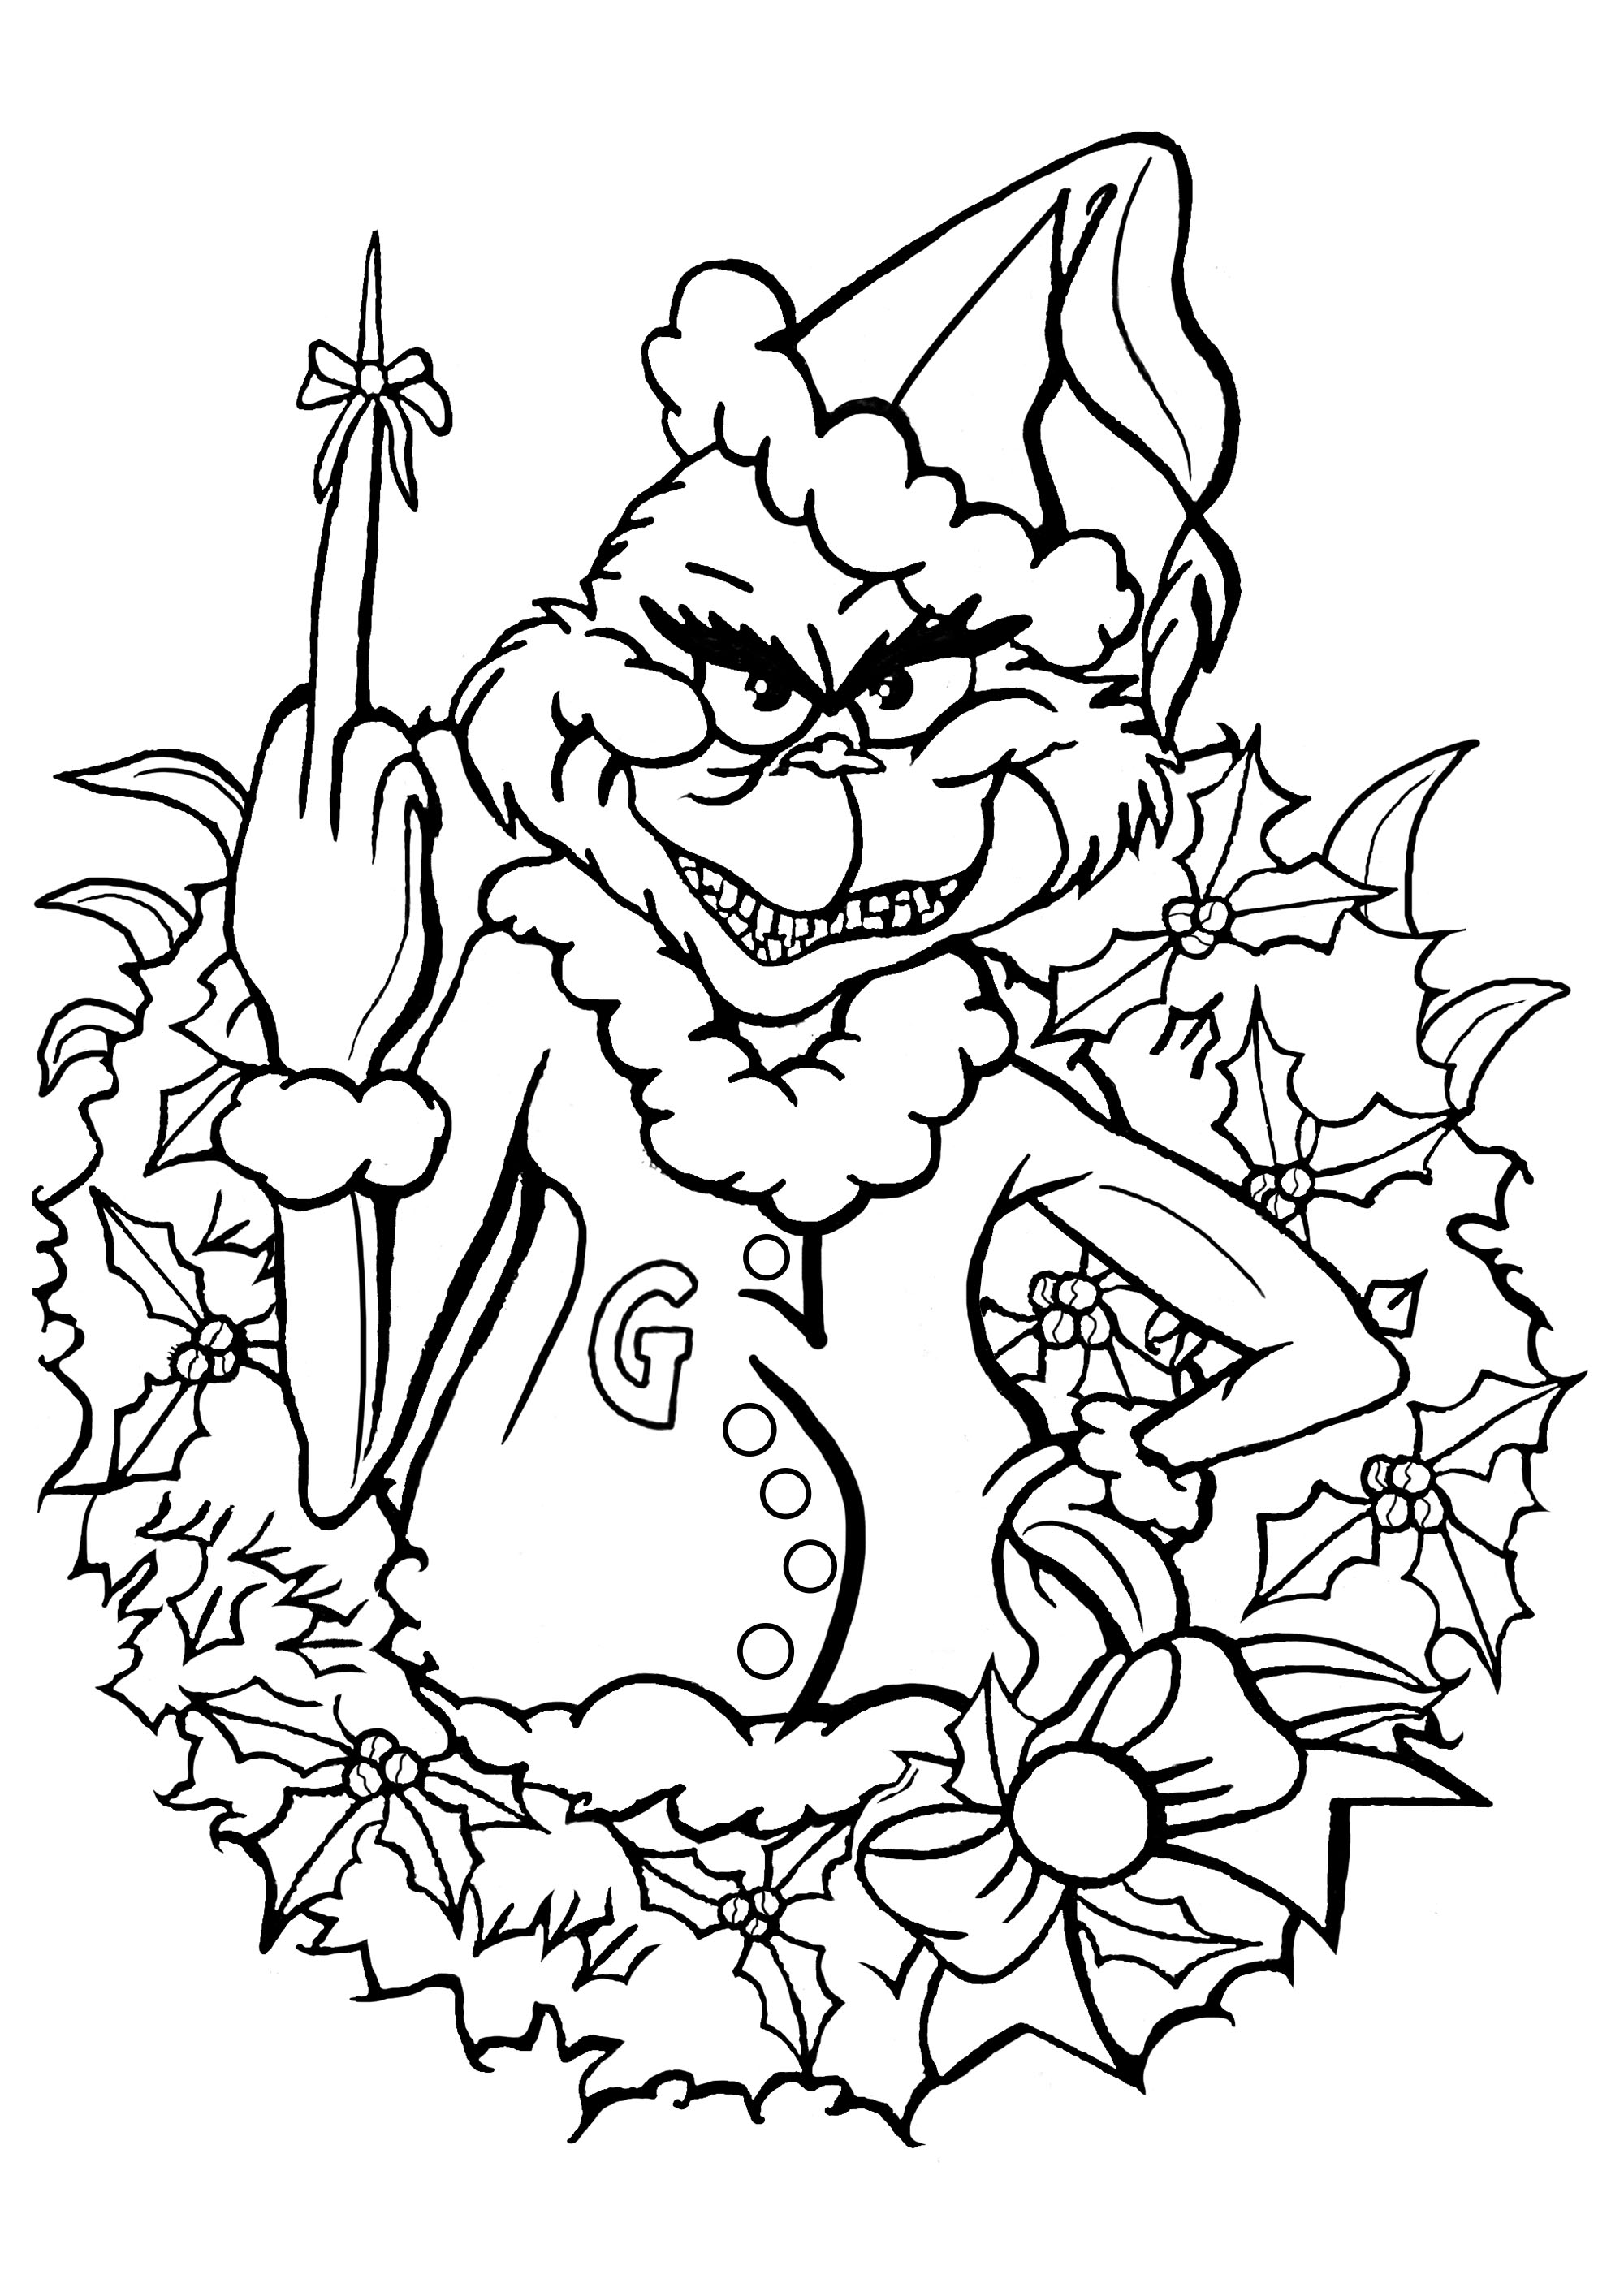 o-grinch-natal-coloring-pages-for-adults